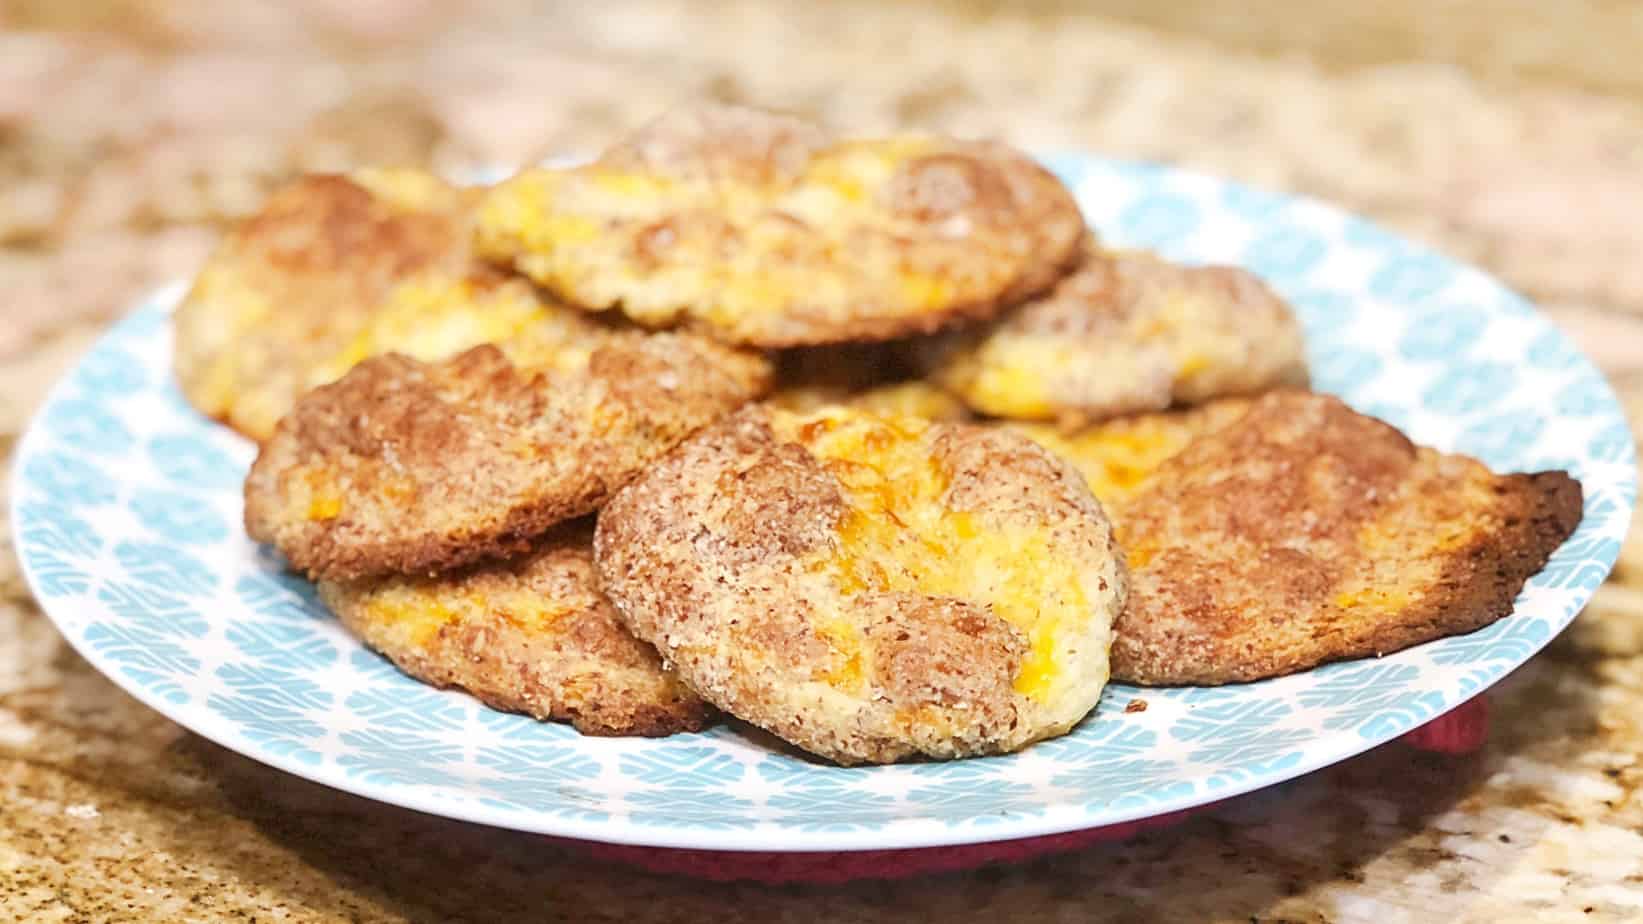 Keto Country Biscuit Recipe